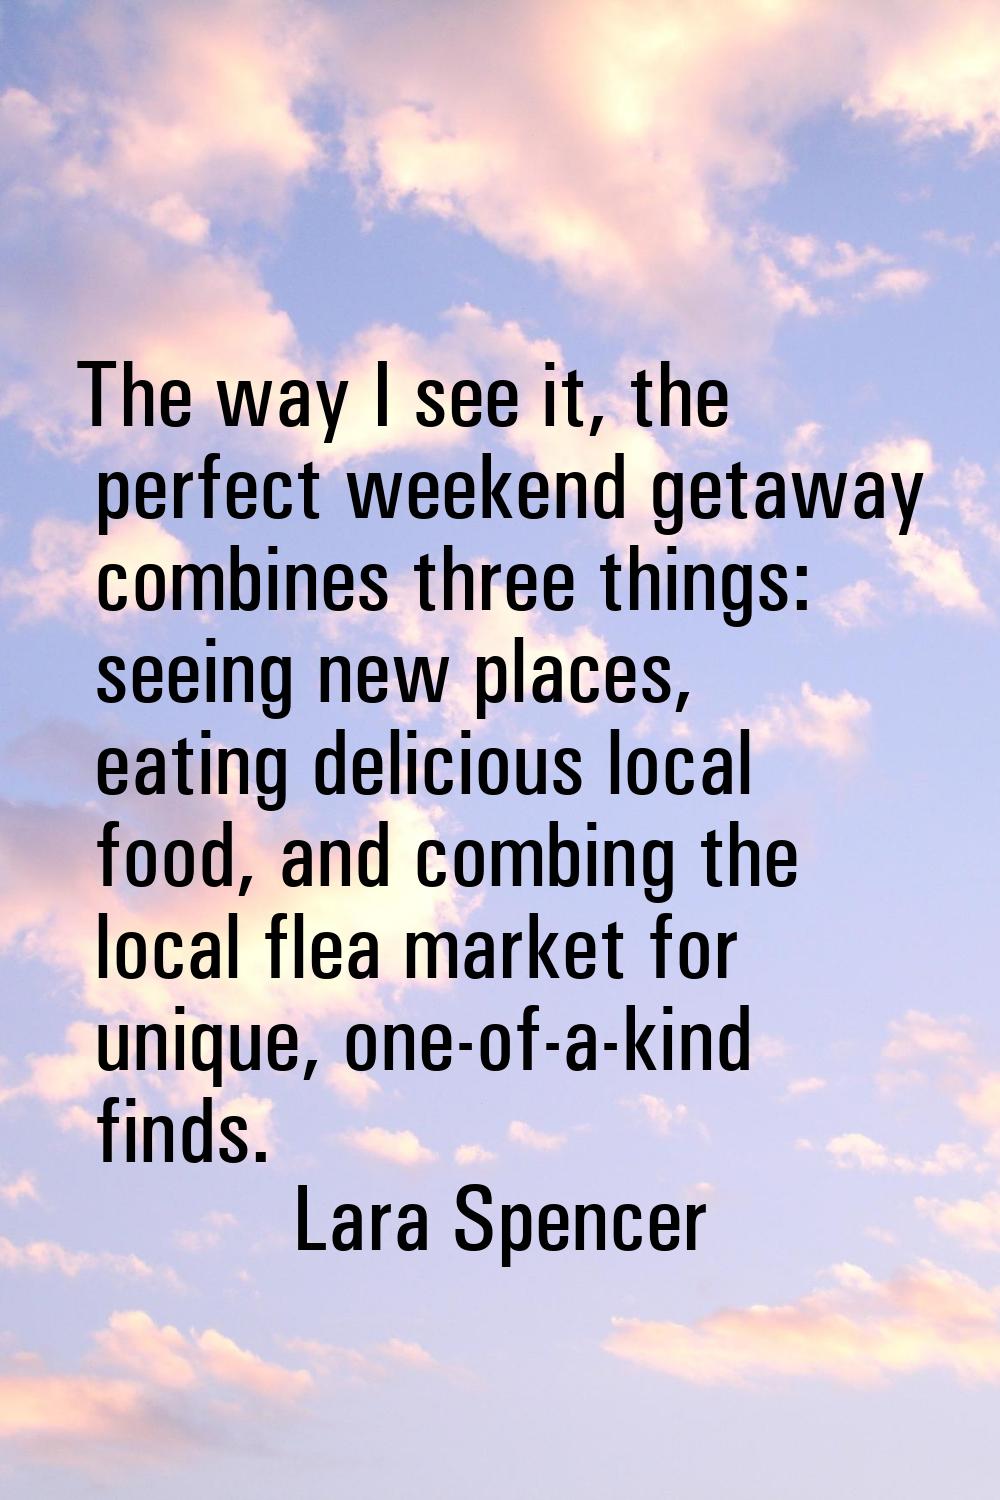 The way I see it, the perfect weekend getaway combines three things: seeing new places, eating deli